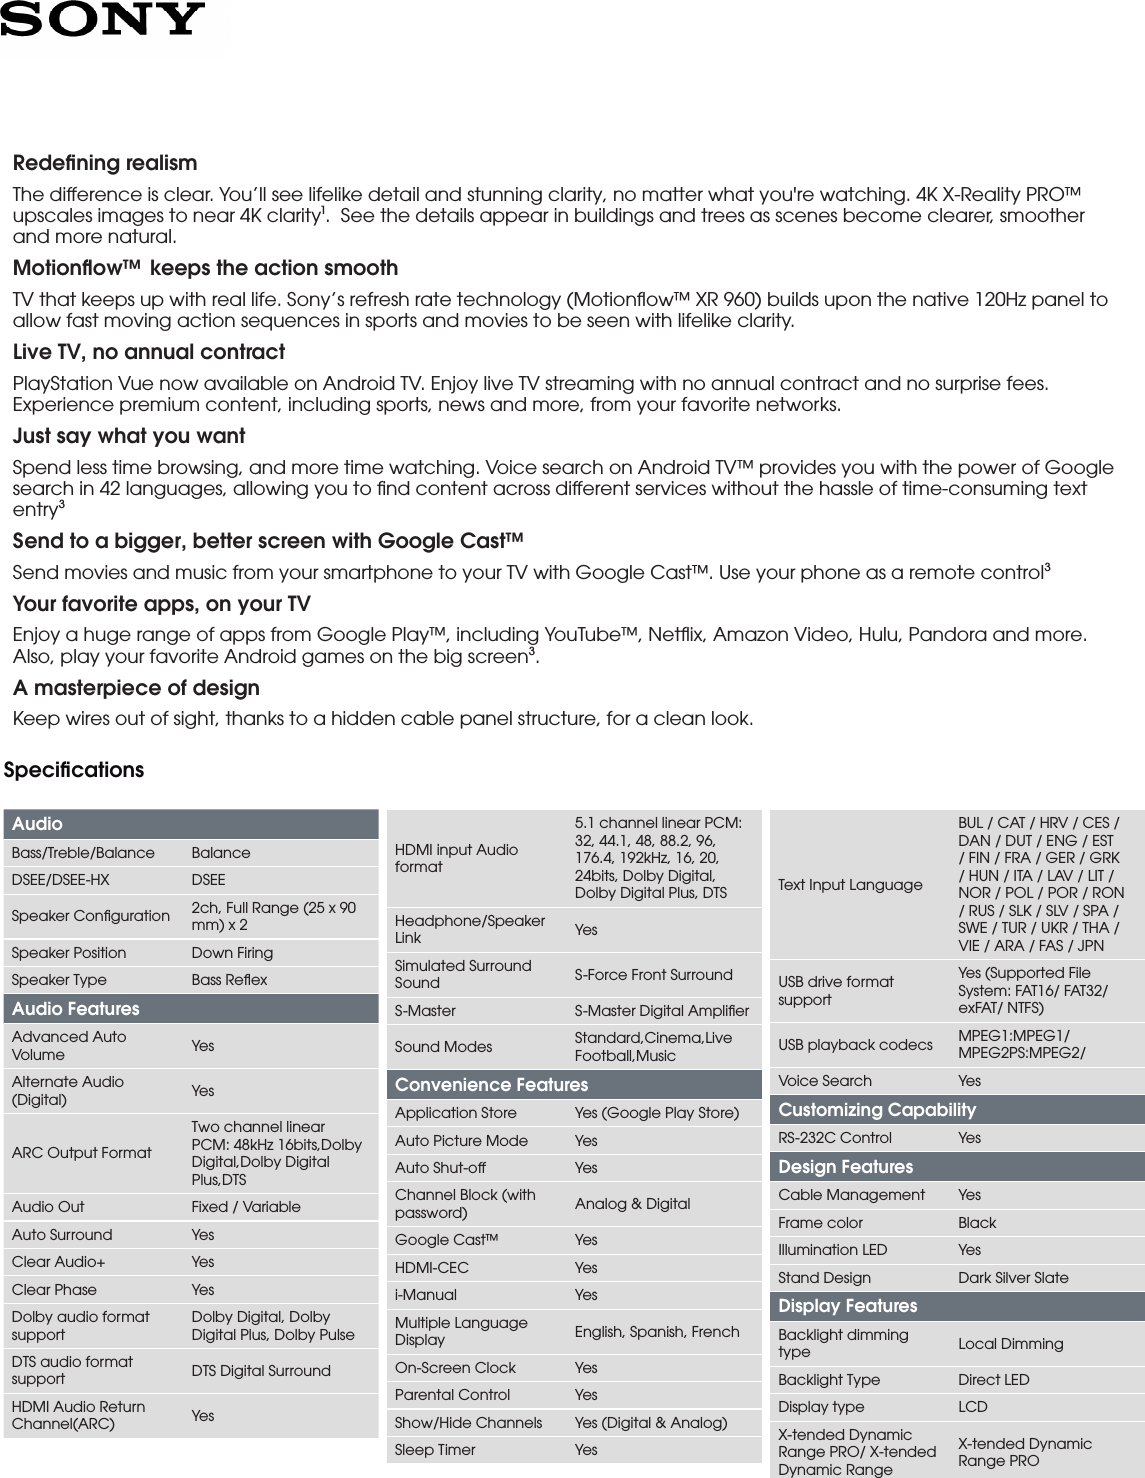 Page 2 of 4 - Sony XBR-49X900E User Manual Marketing Specifications XBR49X900E Mksp